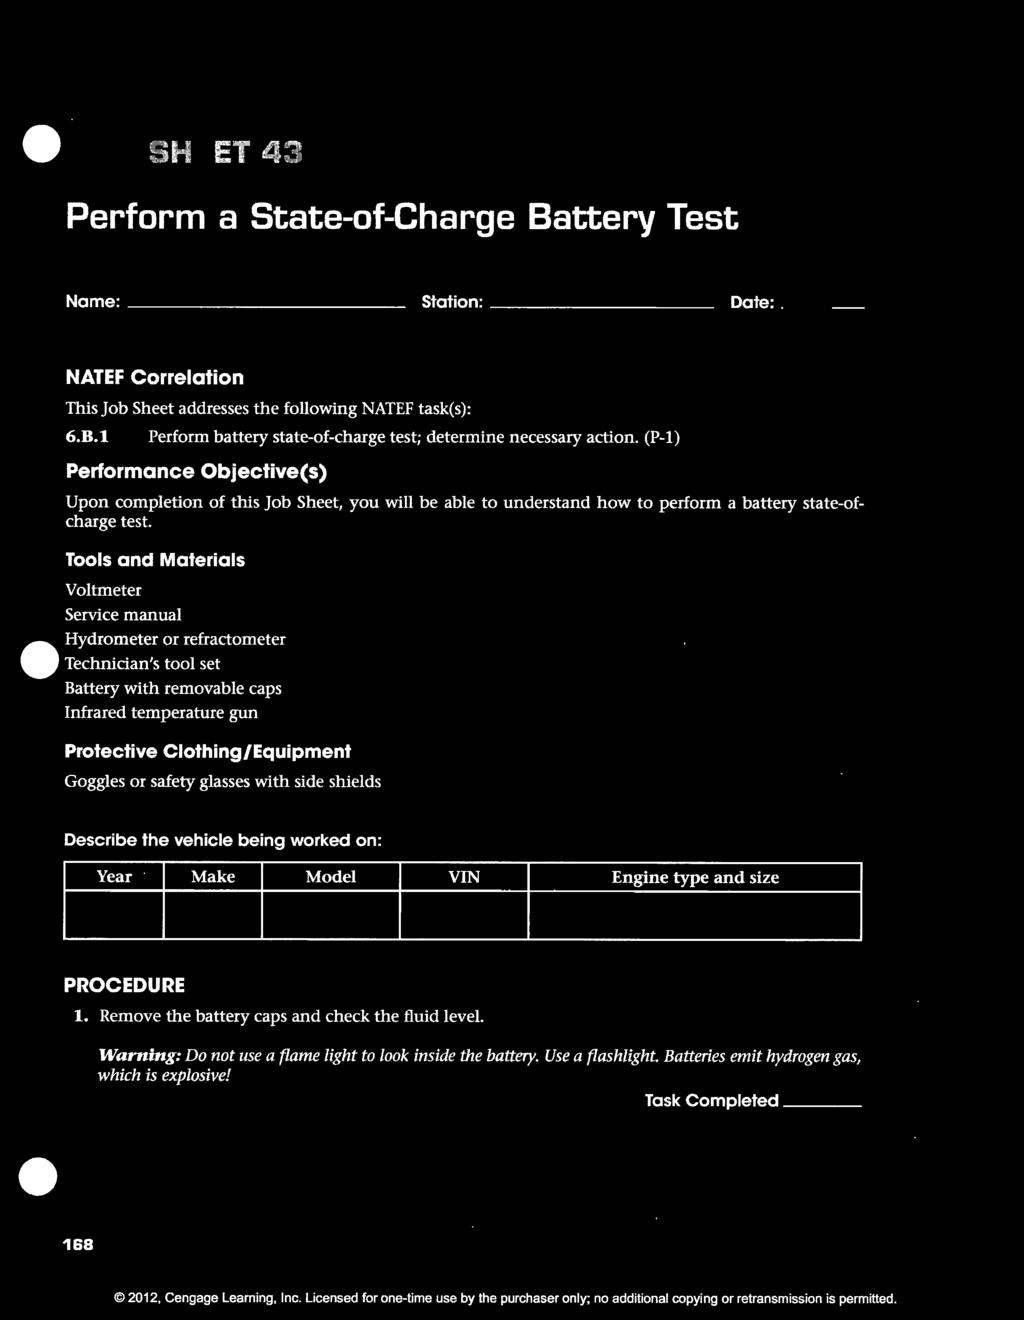 JOB SHEET 43 Perform a State-of-Charge Battery Test Name: --------------------------- Station: --------------------- Date: NATEF Correlation This Job Sheet addresses the following NATEF task(s): 6.B.l Perform battery state-of-charge test; determine necessary action.